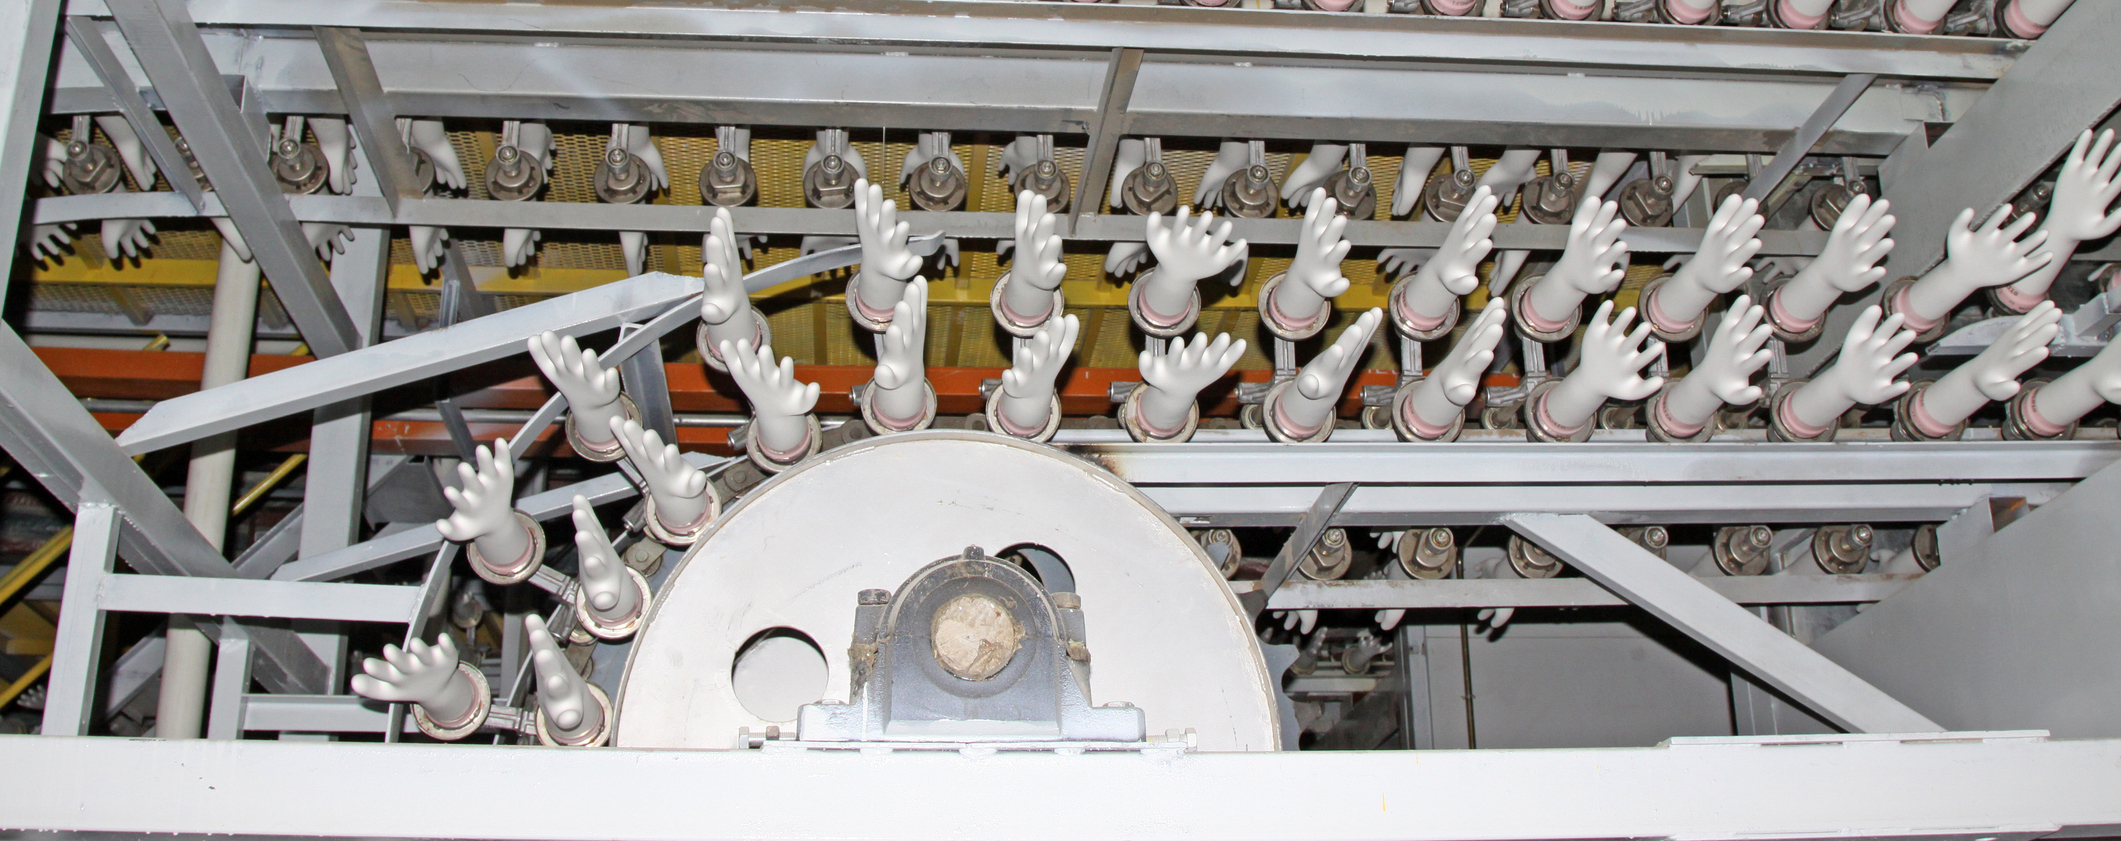 Widescreen picture, the manufacturing of gloves - stock photo